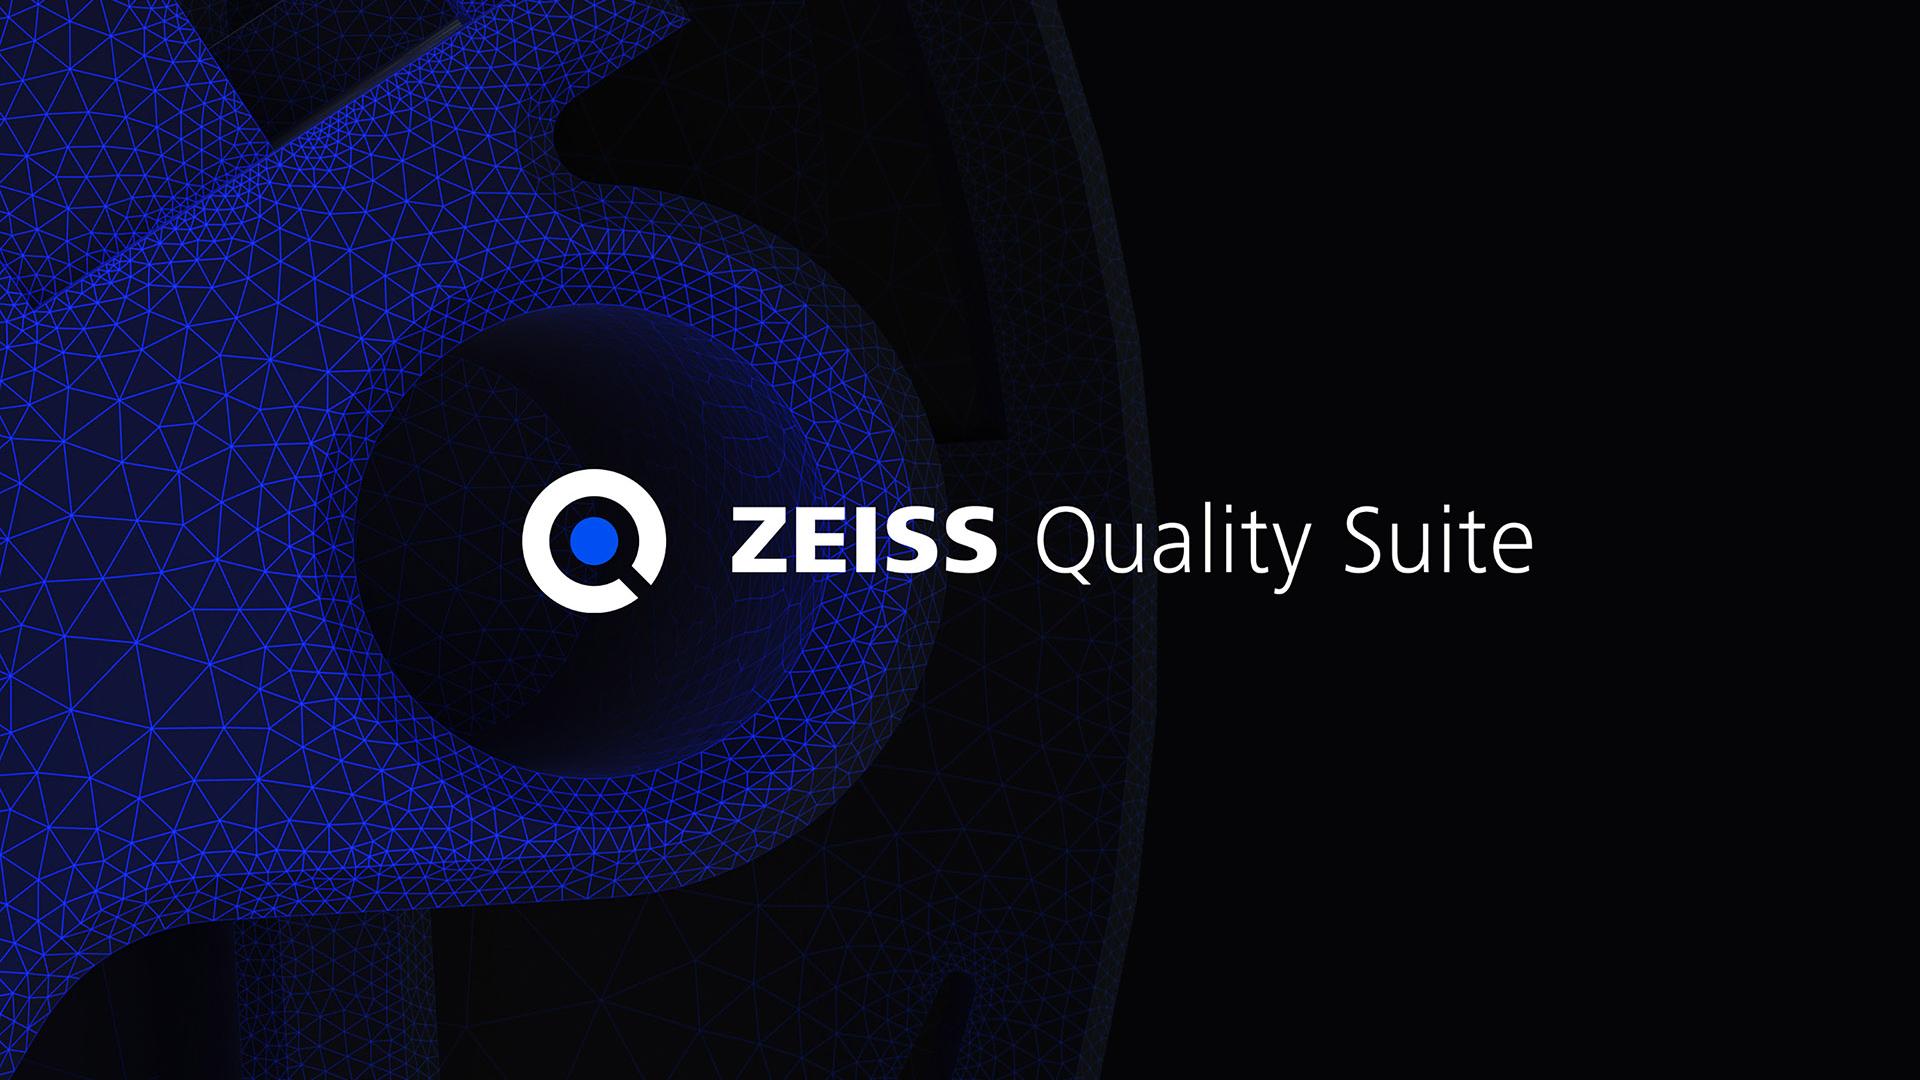 ZEISS Quality Suite for Software and Digital Services 